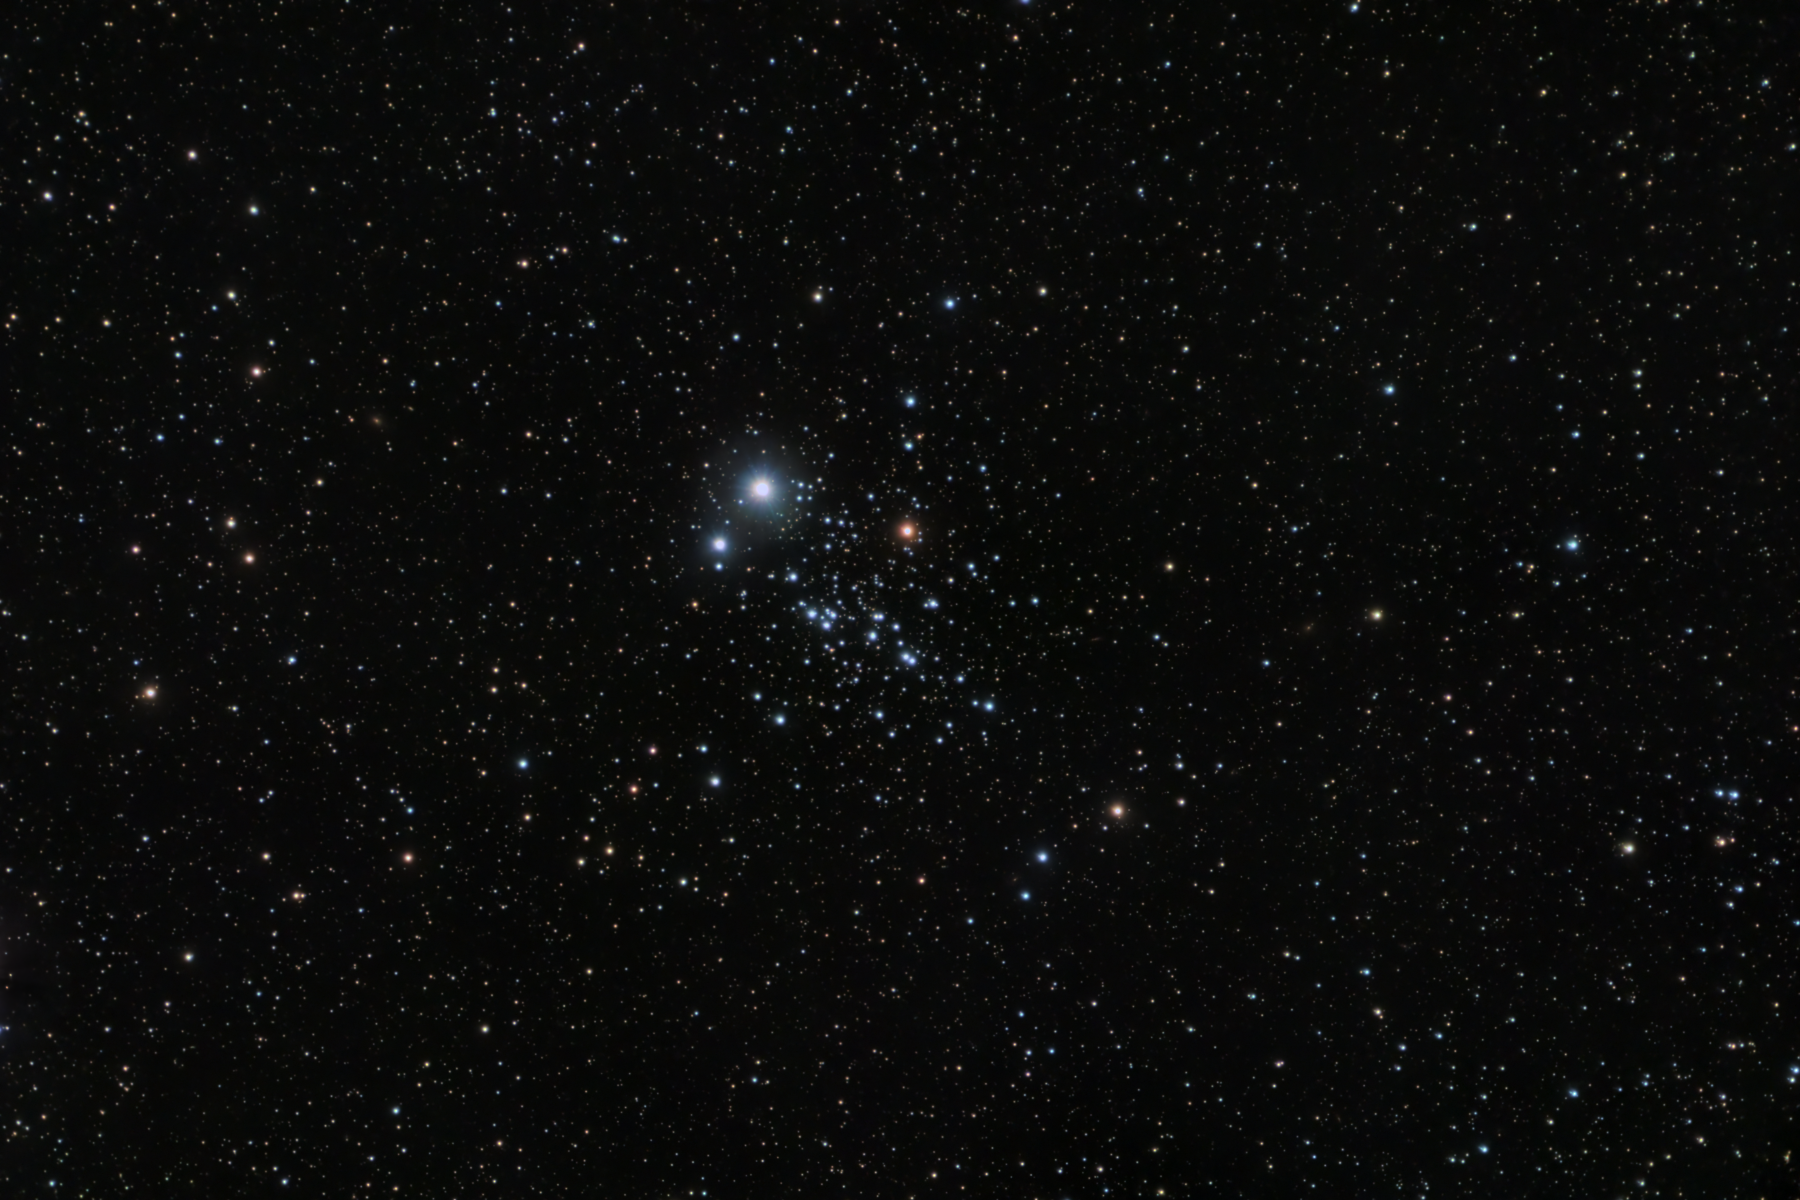 NGC 457 in Cassiopeia